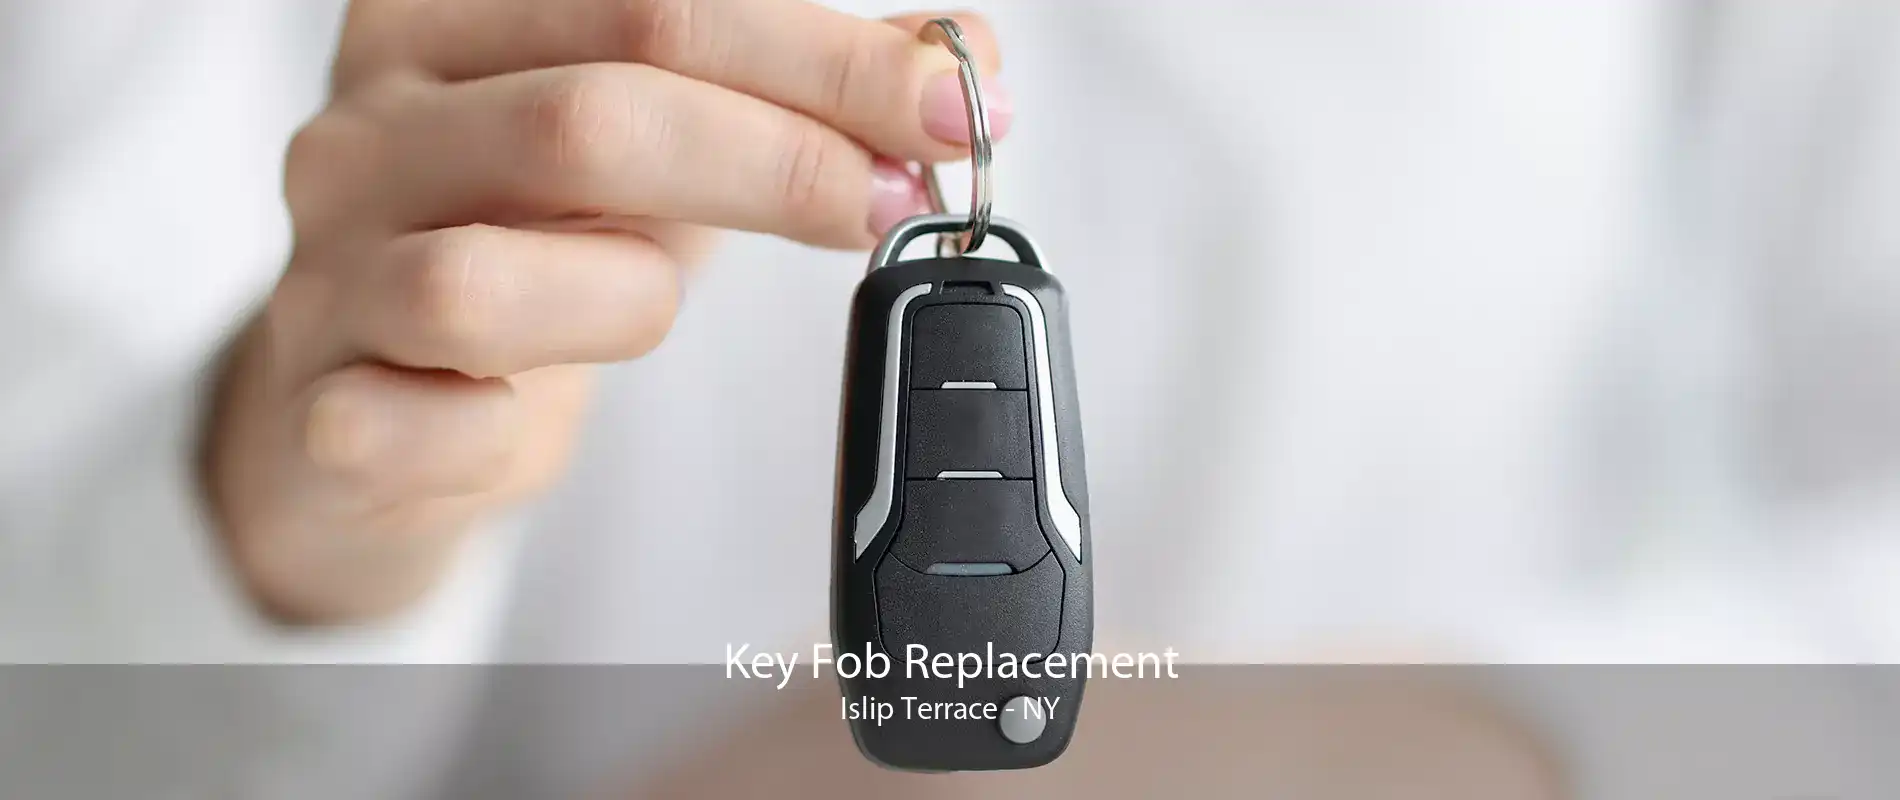 Key Fob Replacement Islip Terrace - NY